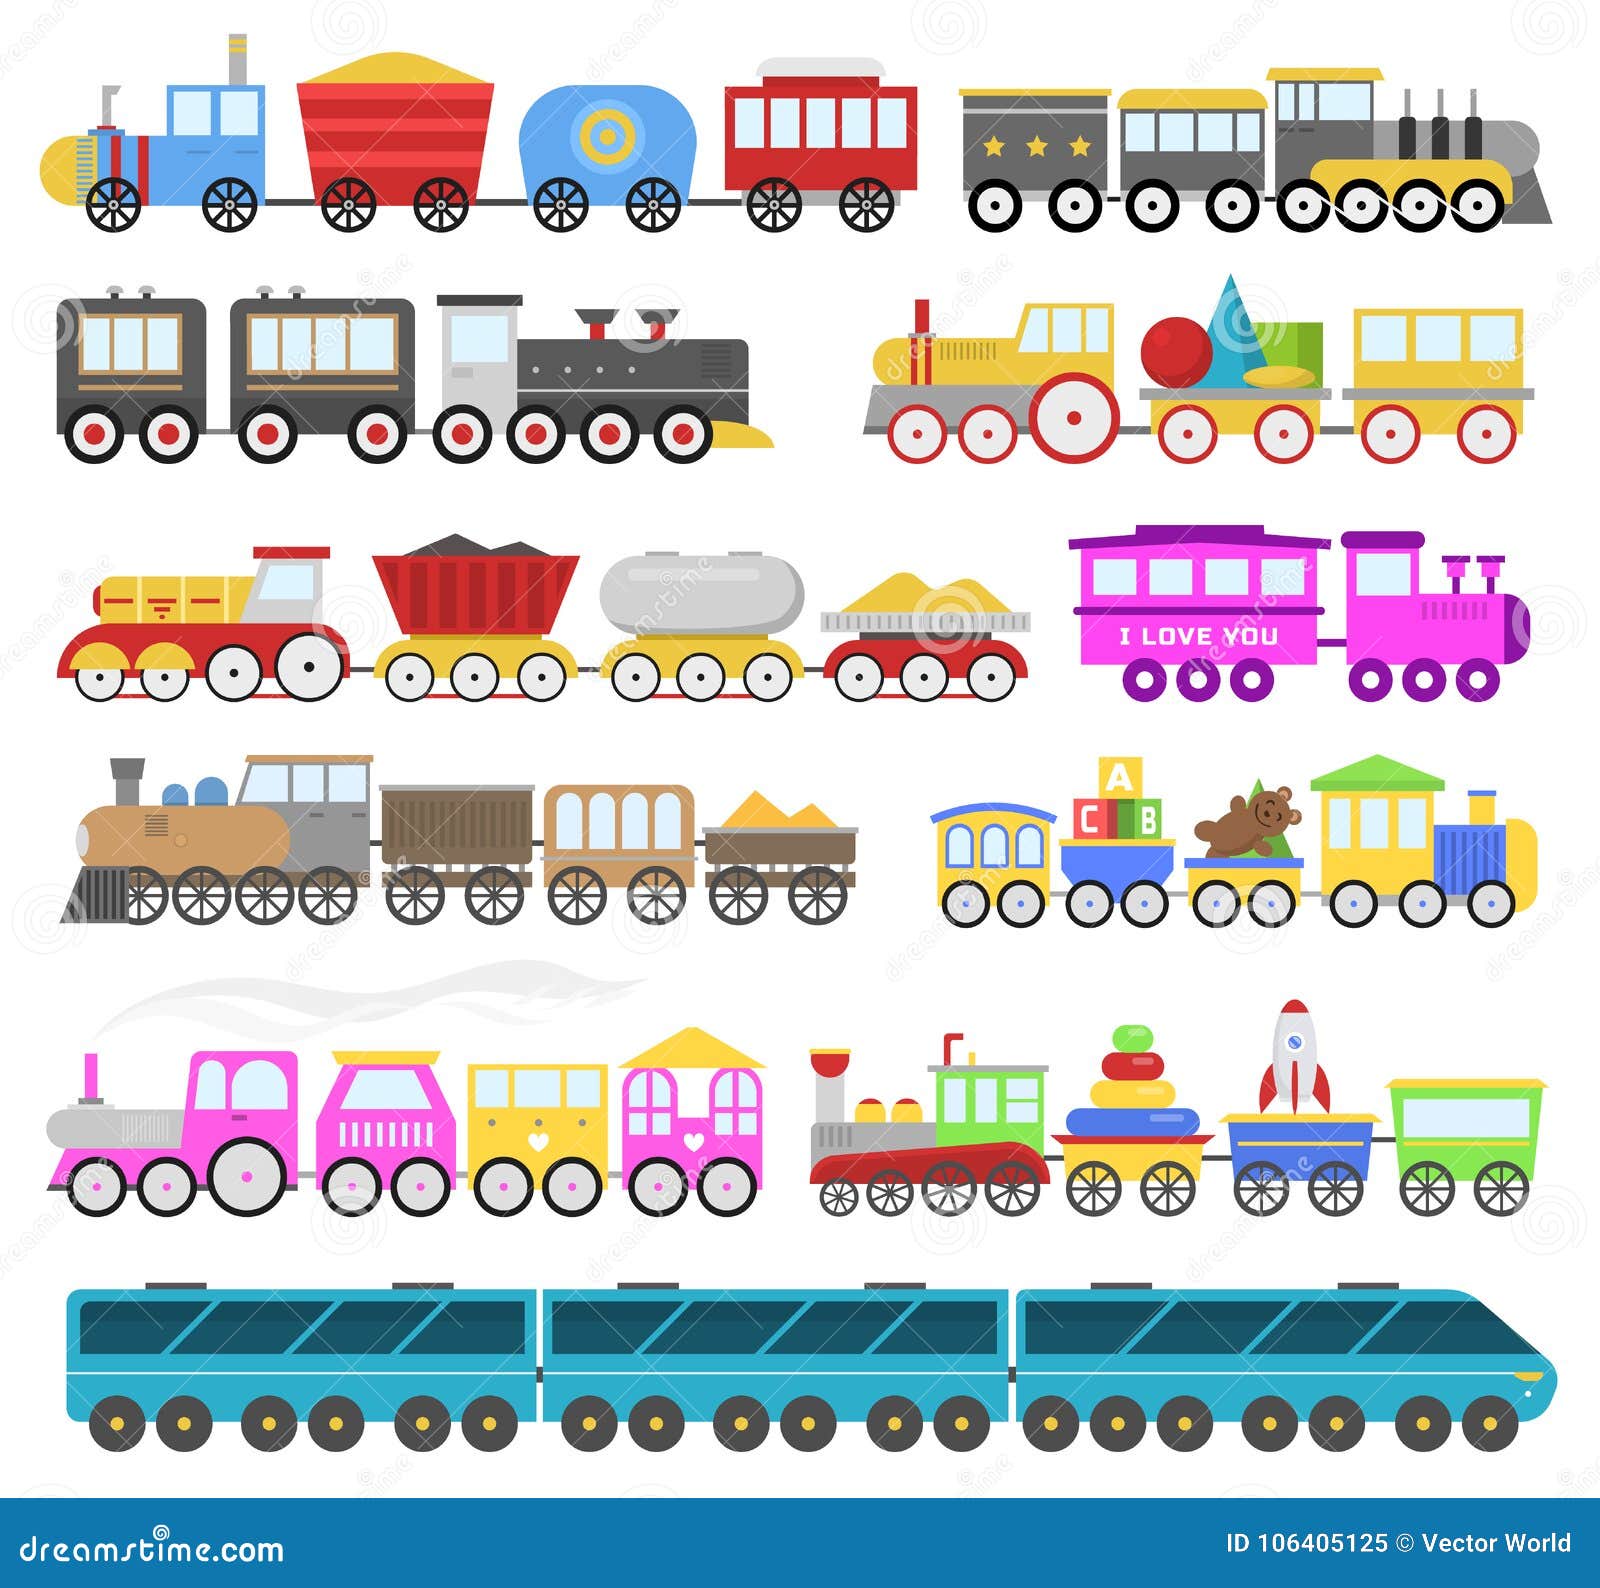 kids train  cartoon baby railroad toy or railway game with locomotive gifted on happy birthday to child in